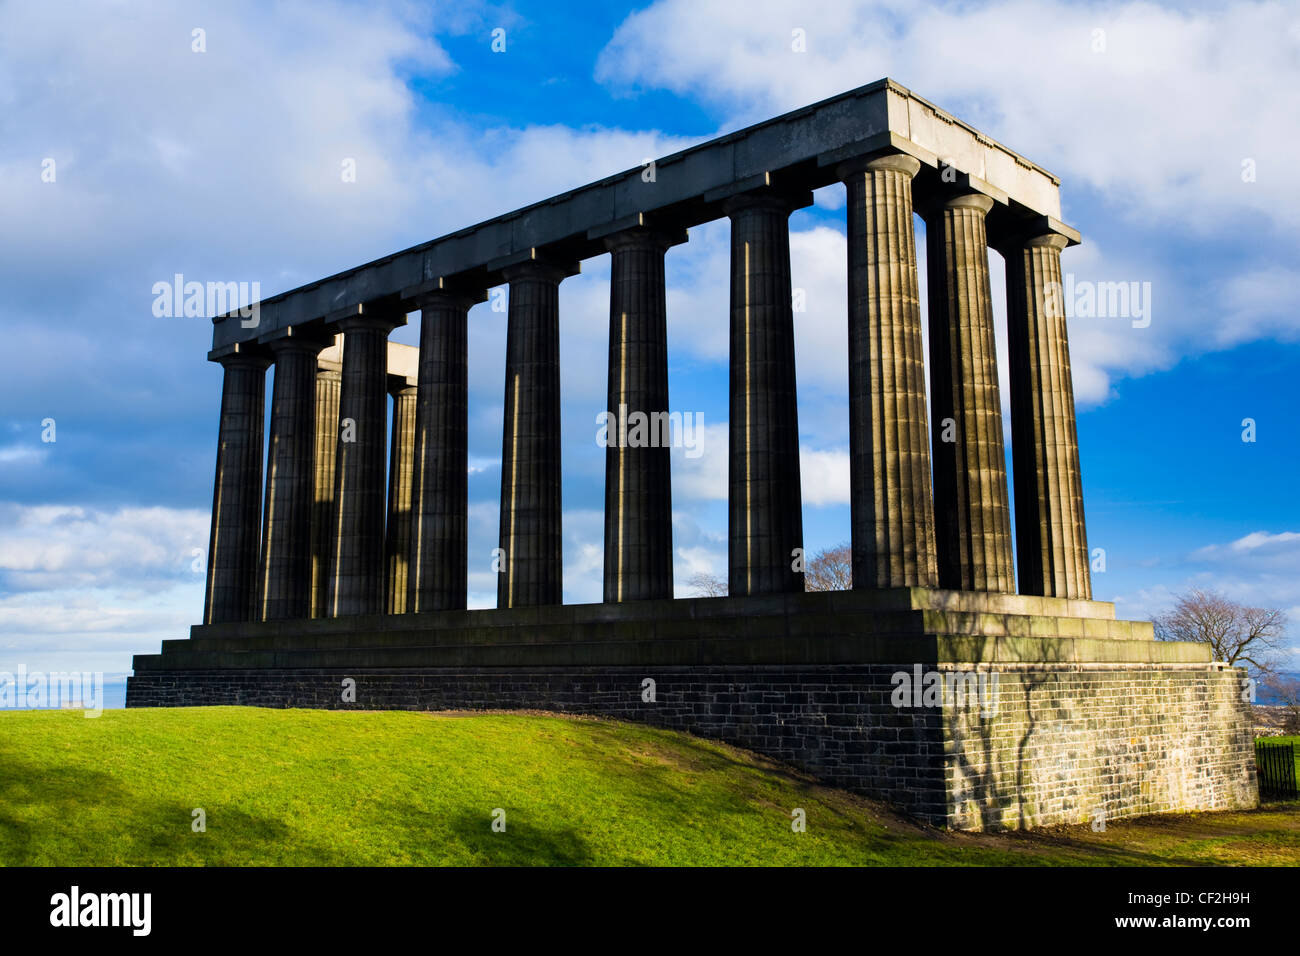 The National Monument on Calton Hill, known by many as Edinburgh's Disgrace   as it is considered to be an incomplete constructi Stock Photo